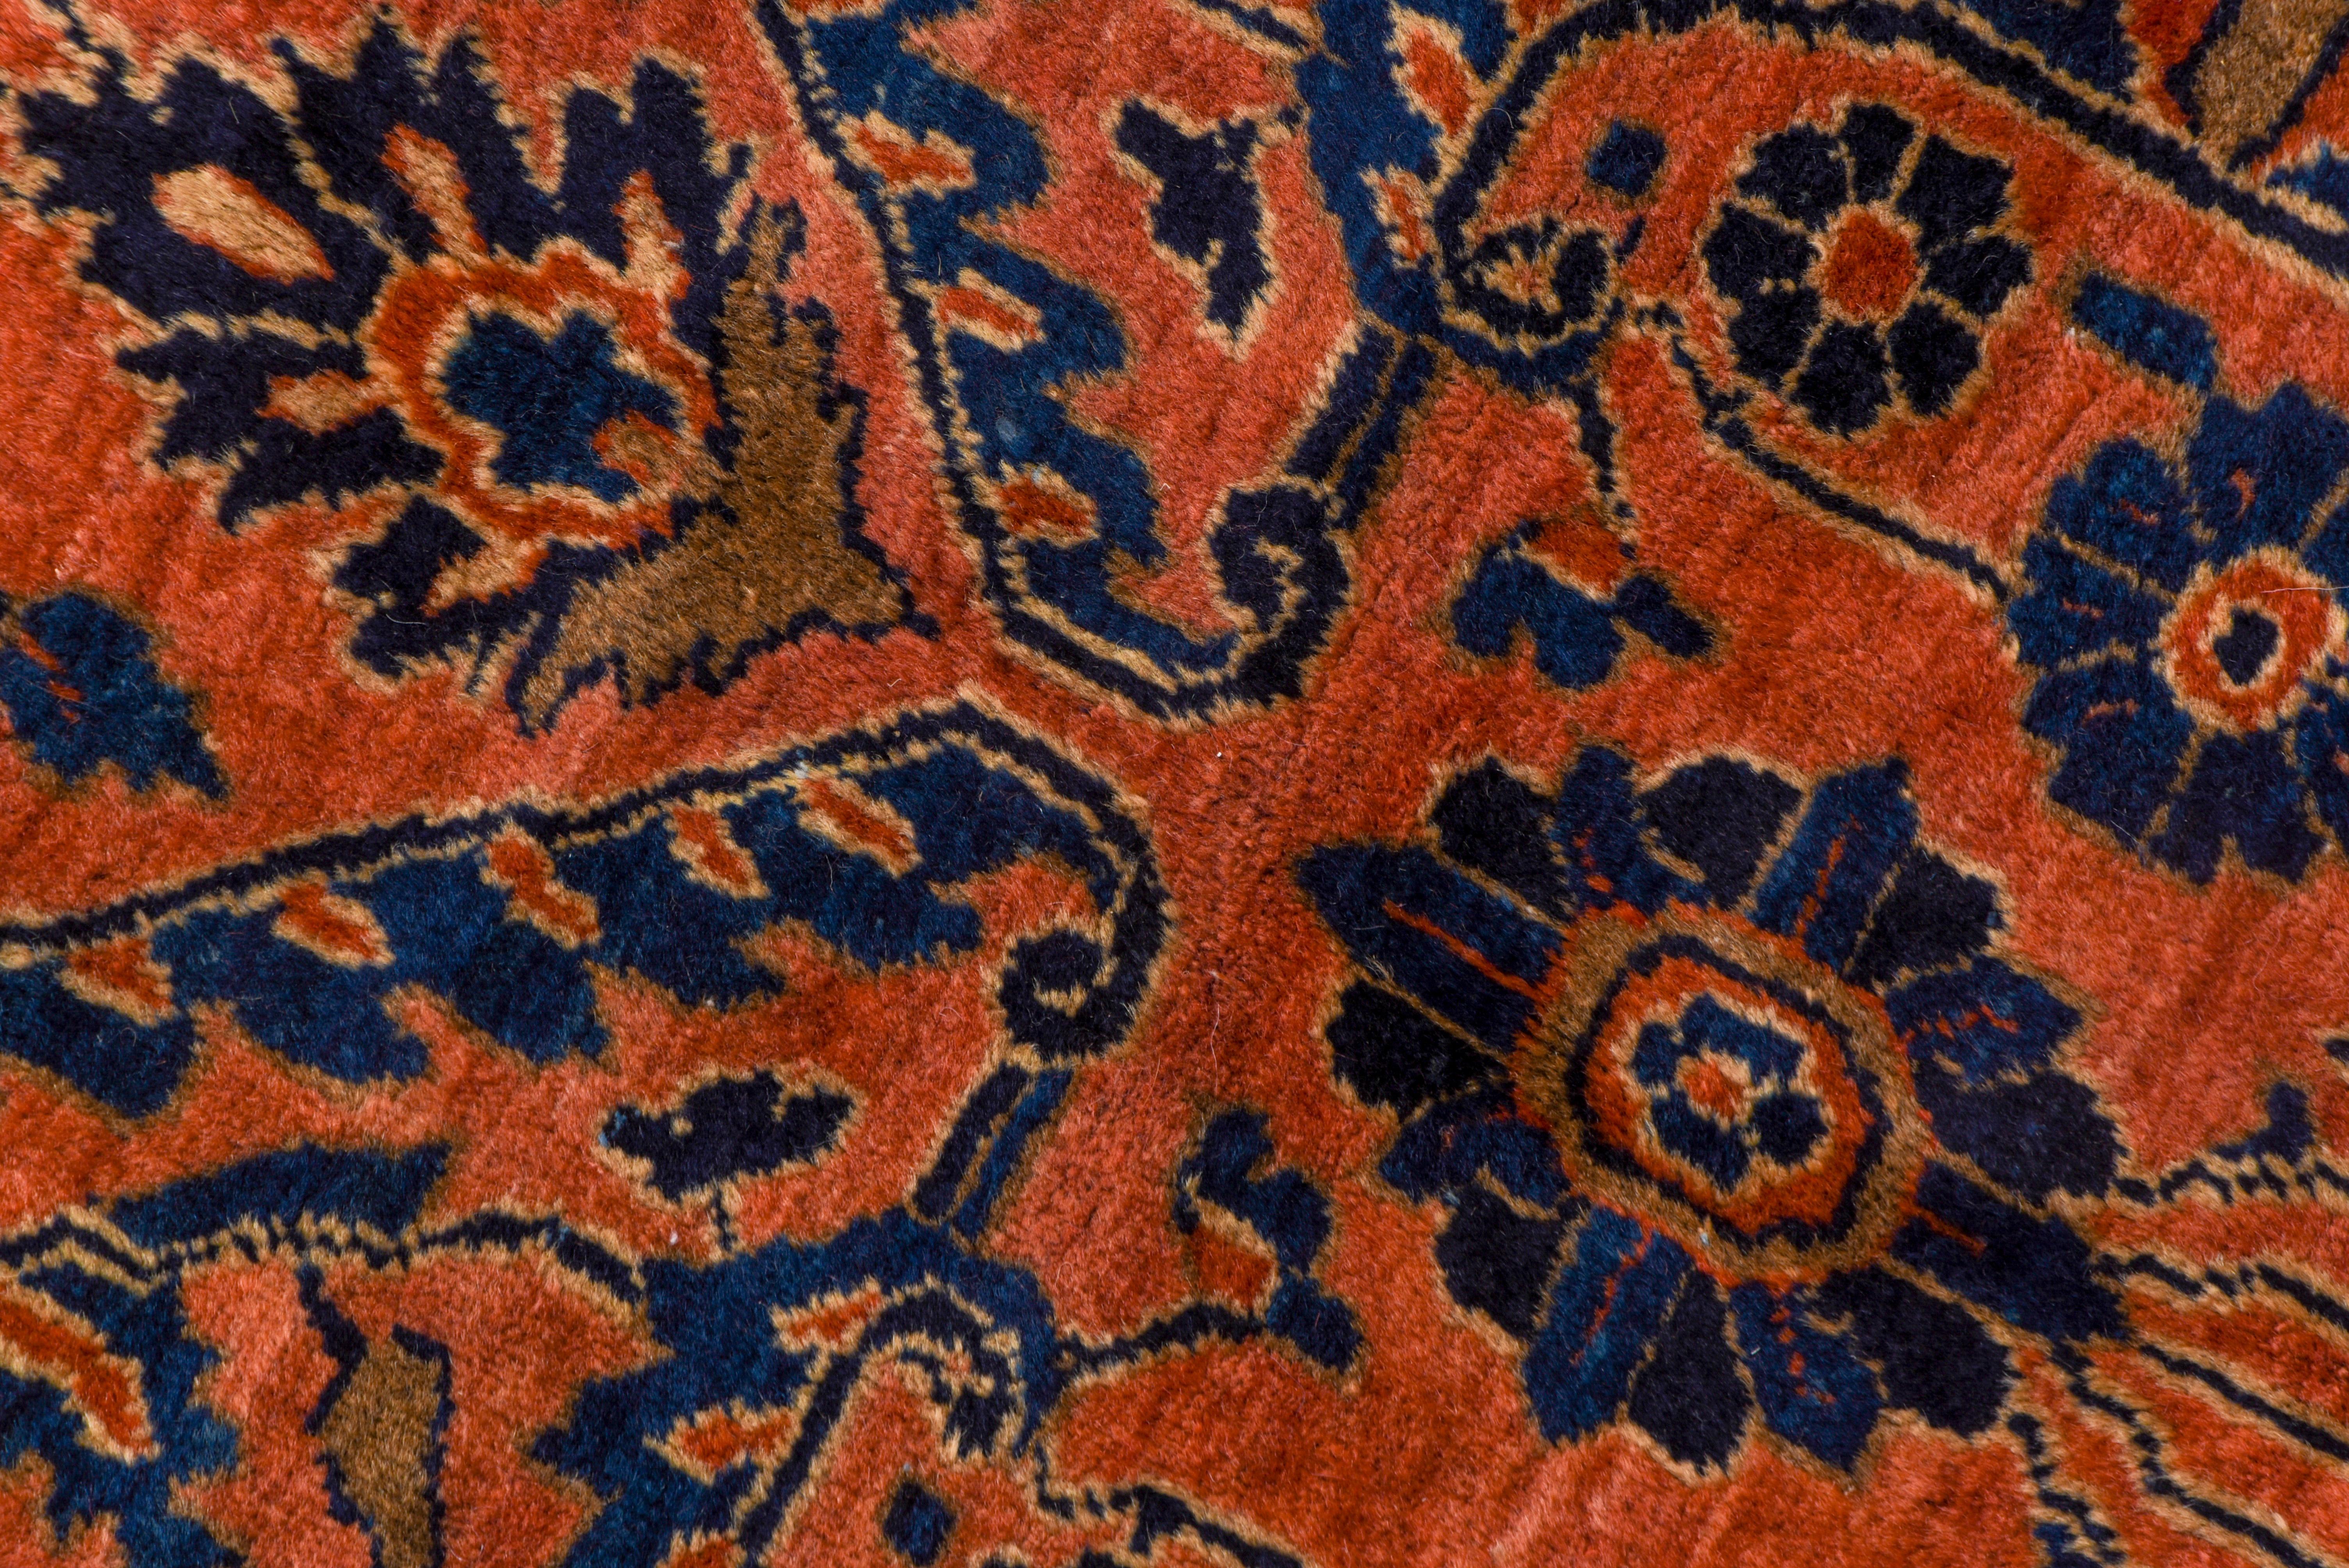 Antique Persian Sarouk Gallery Carpet, Orange Allover Field, Mansion Style In Good Condition For Sale In New York, NY